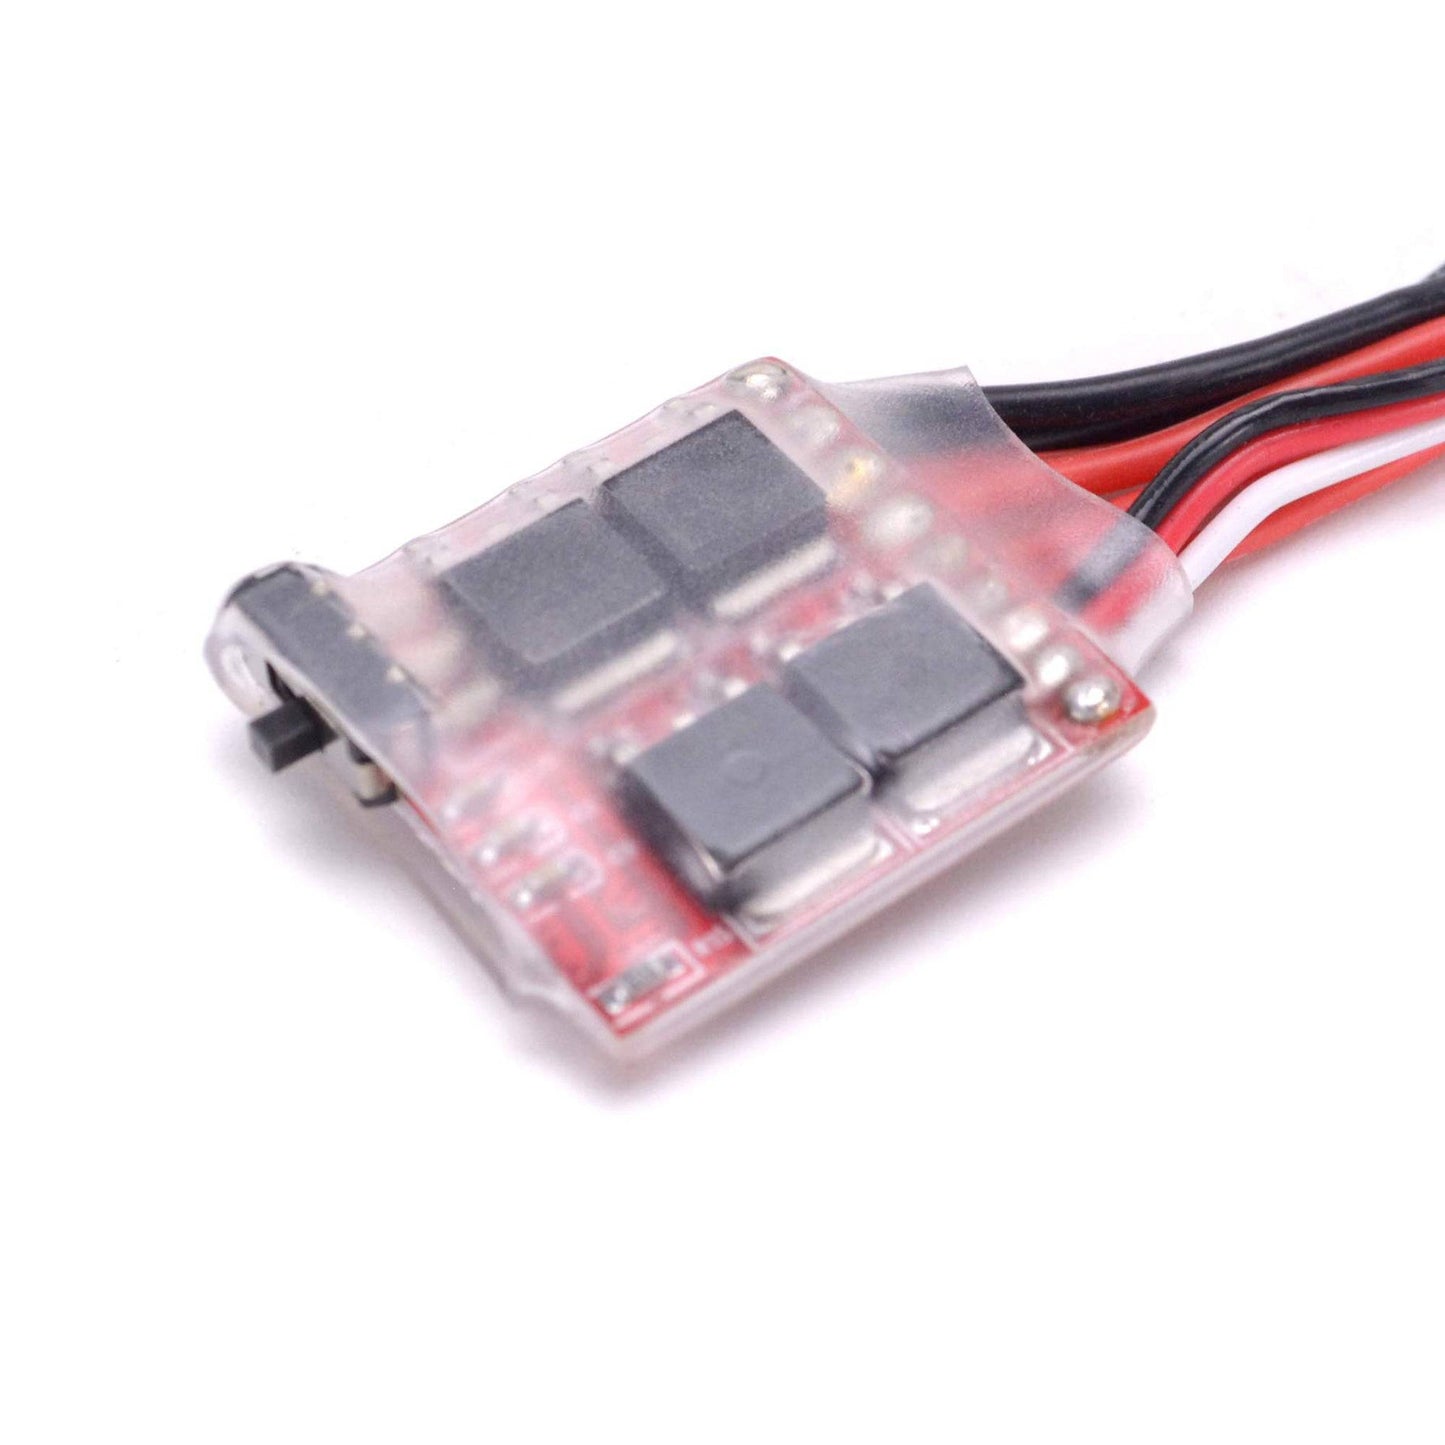 20A Brushed ESC for RC Car Boat Tank